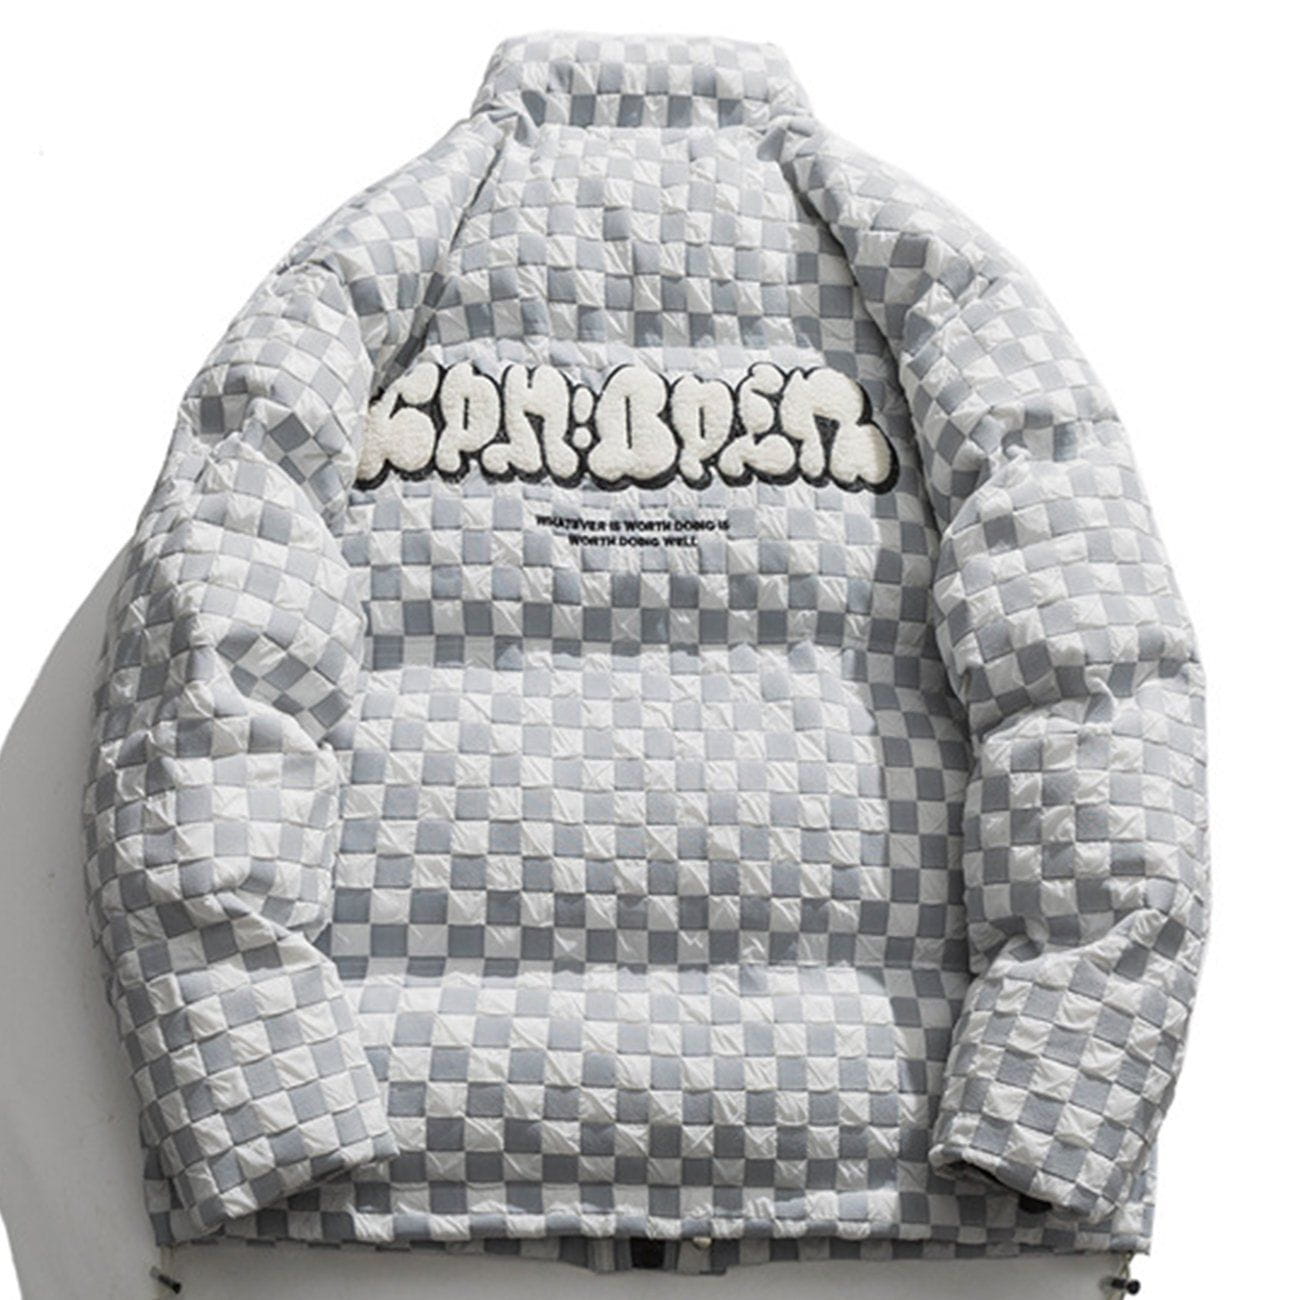 Sneakerland™ - Vintage Checkerboard Plaid Embroidery Puffer Jacket